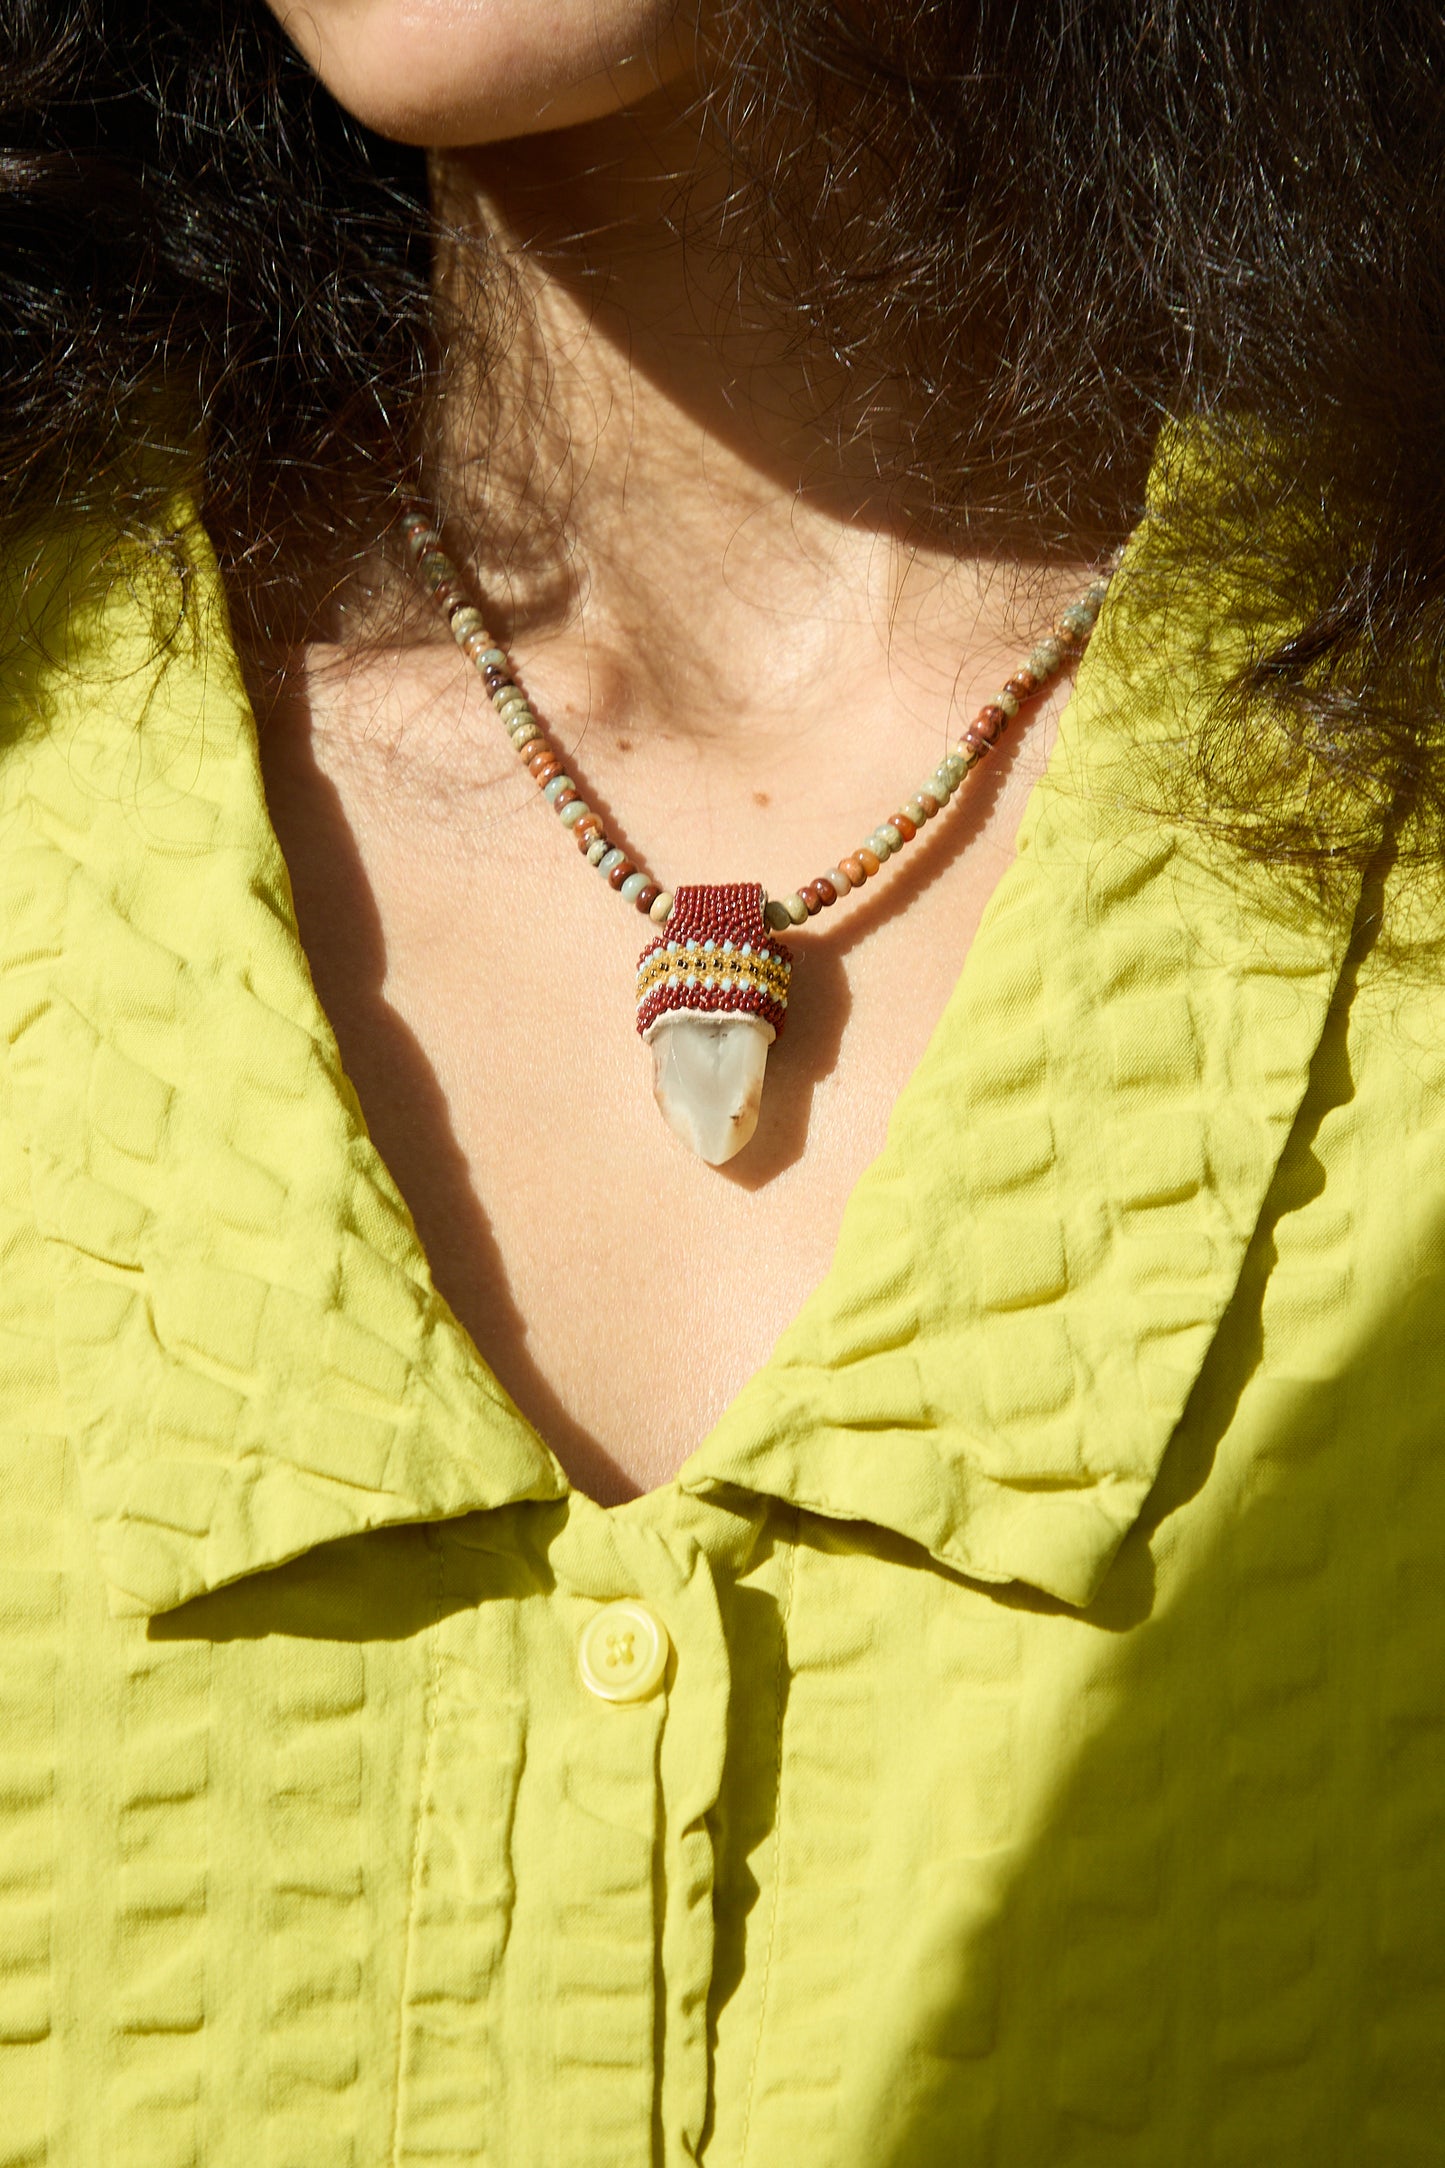 A person wearing a Pendulum Necklace adorned with Sea Sediment Imperial Jasper beads and Lithium Quartz, designed by Robin Mollicone.